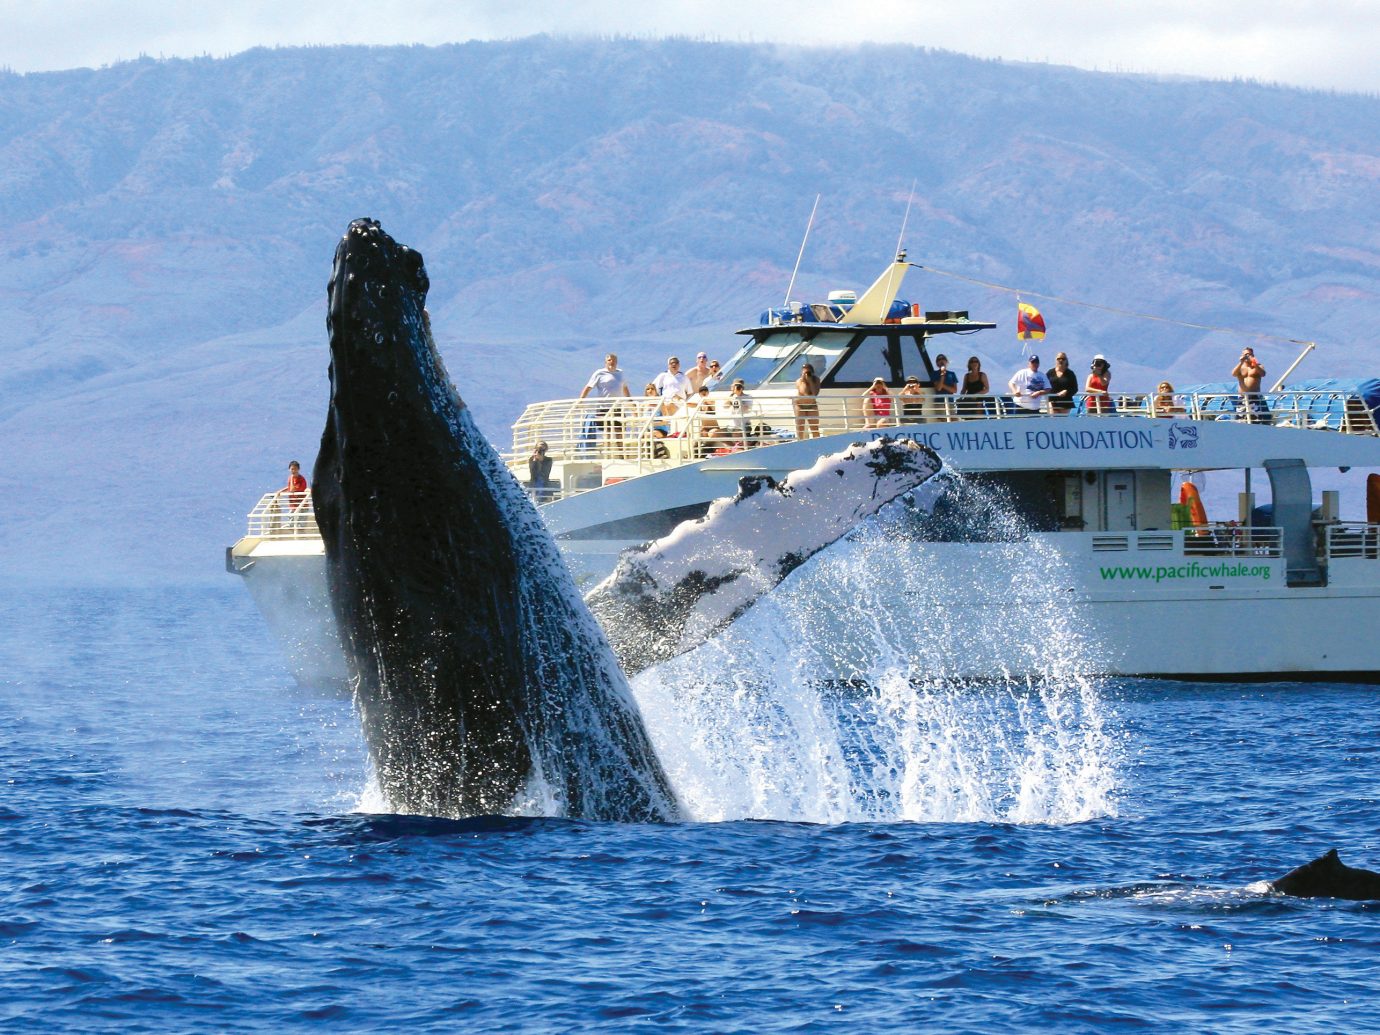 Whale jumping out of water in Maui